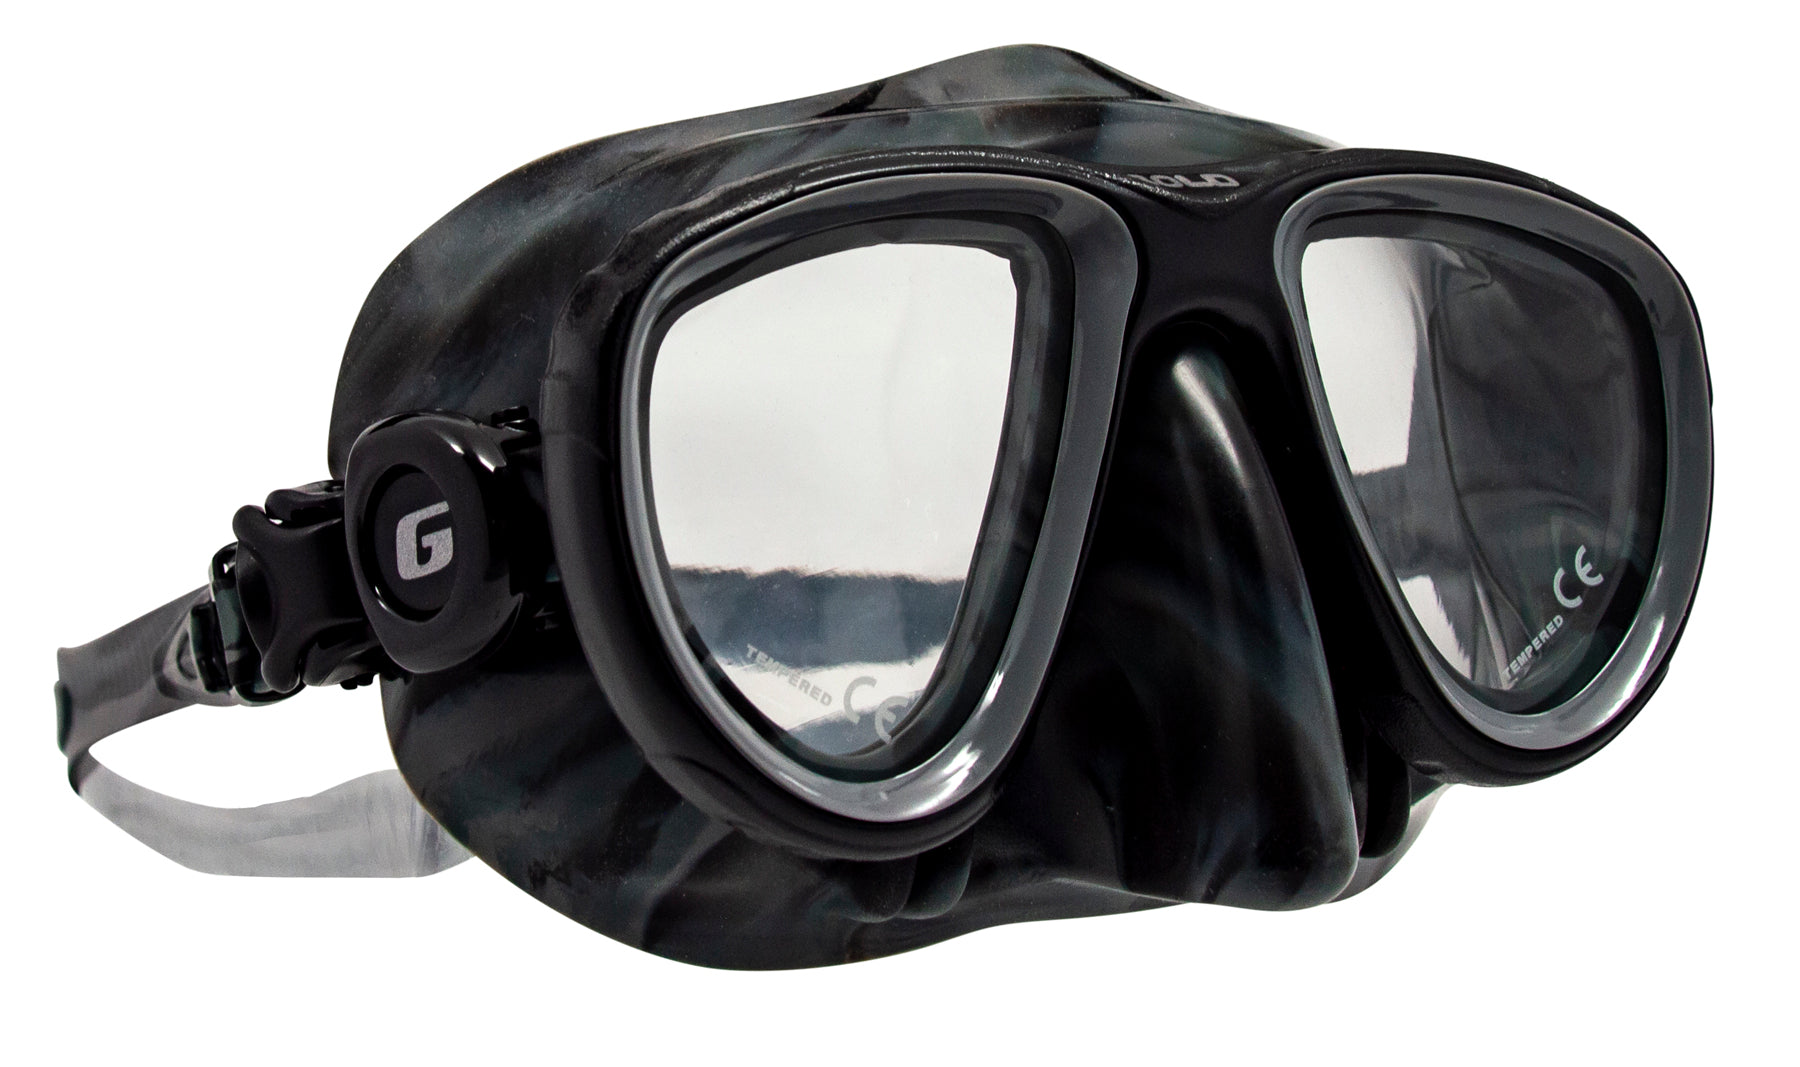 Genesis Bold Spearfishing, Free Diving, Snorkeling, or Scuba Mask with Camo Skirt